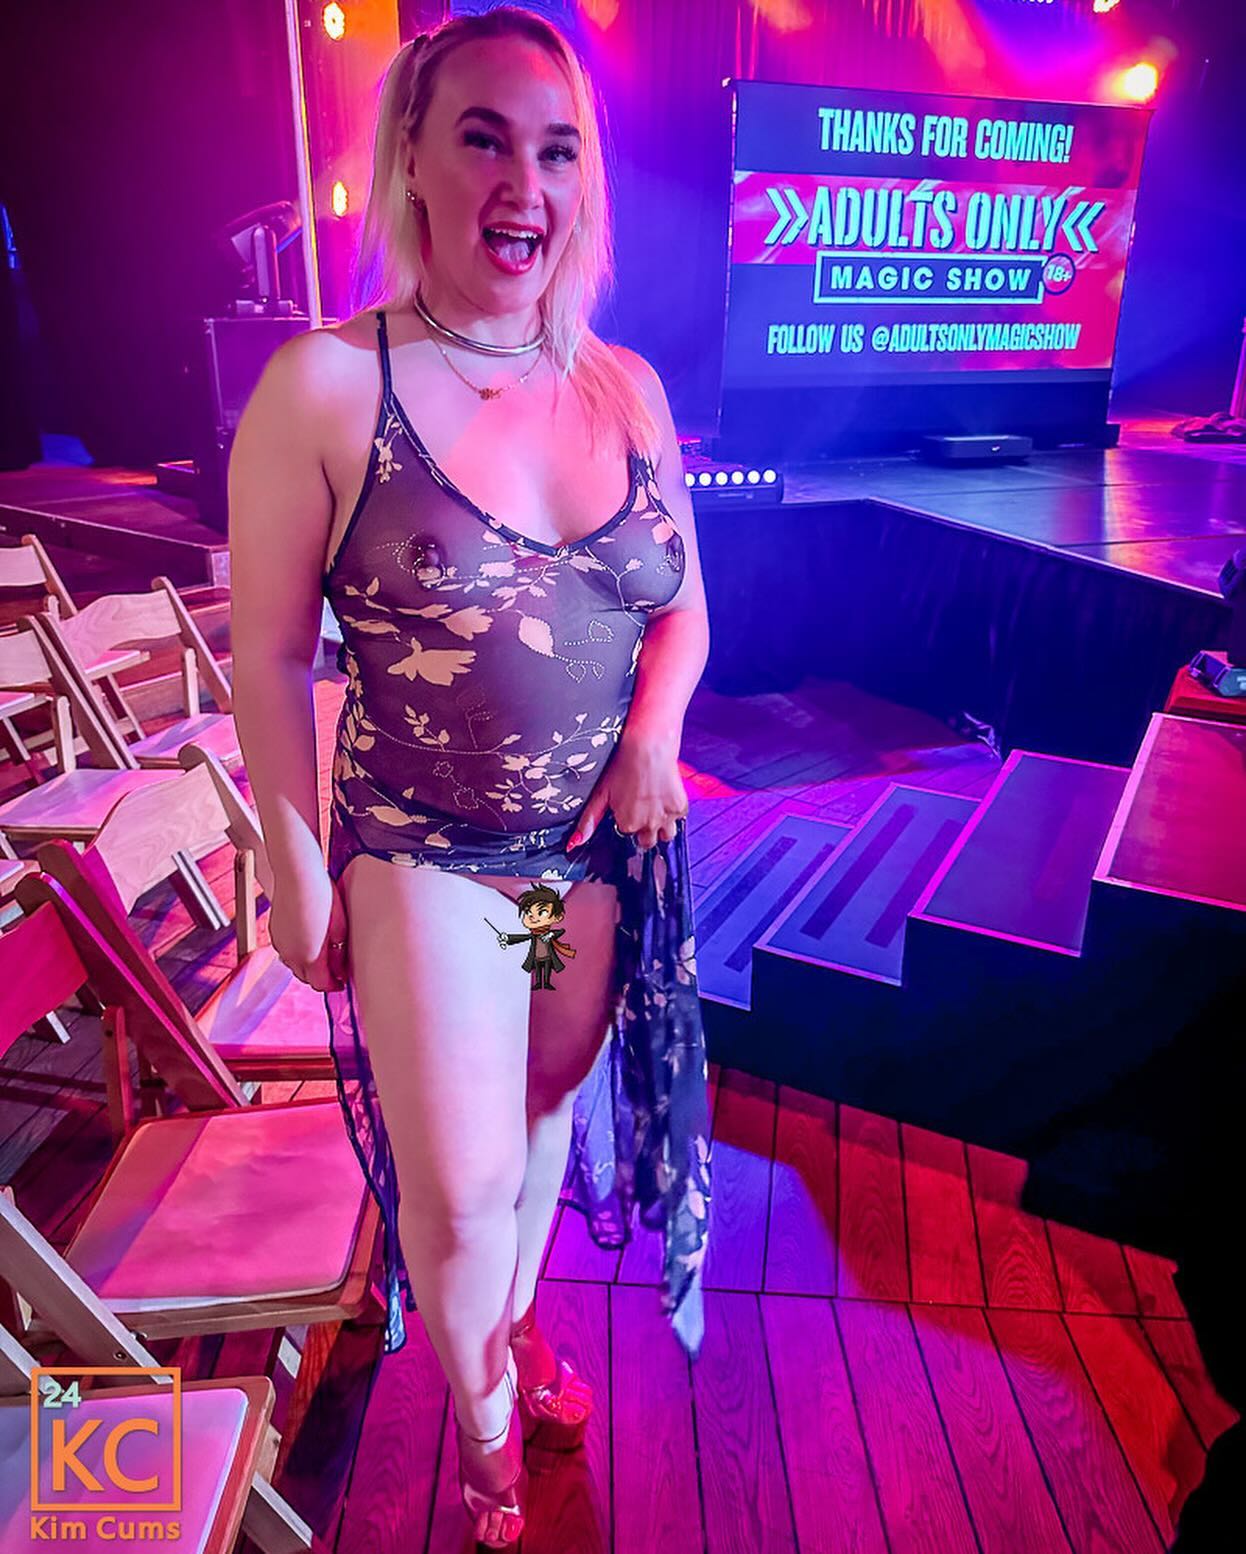 Had a great night @adultsonlymagicshow seeing @magnusdanger @mister_bundles @justinsgoodvibes perform!
Definitely go and see them while they are in town! 😃🎉
.
I think they may have fibbed about having an OF account, so they’ll have to make one to see my evening noods, and find me on “kc.free”! 💙
.
#adultonlymagicshow #wickedweasel #wwmaxidress